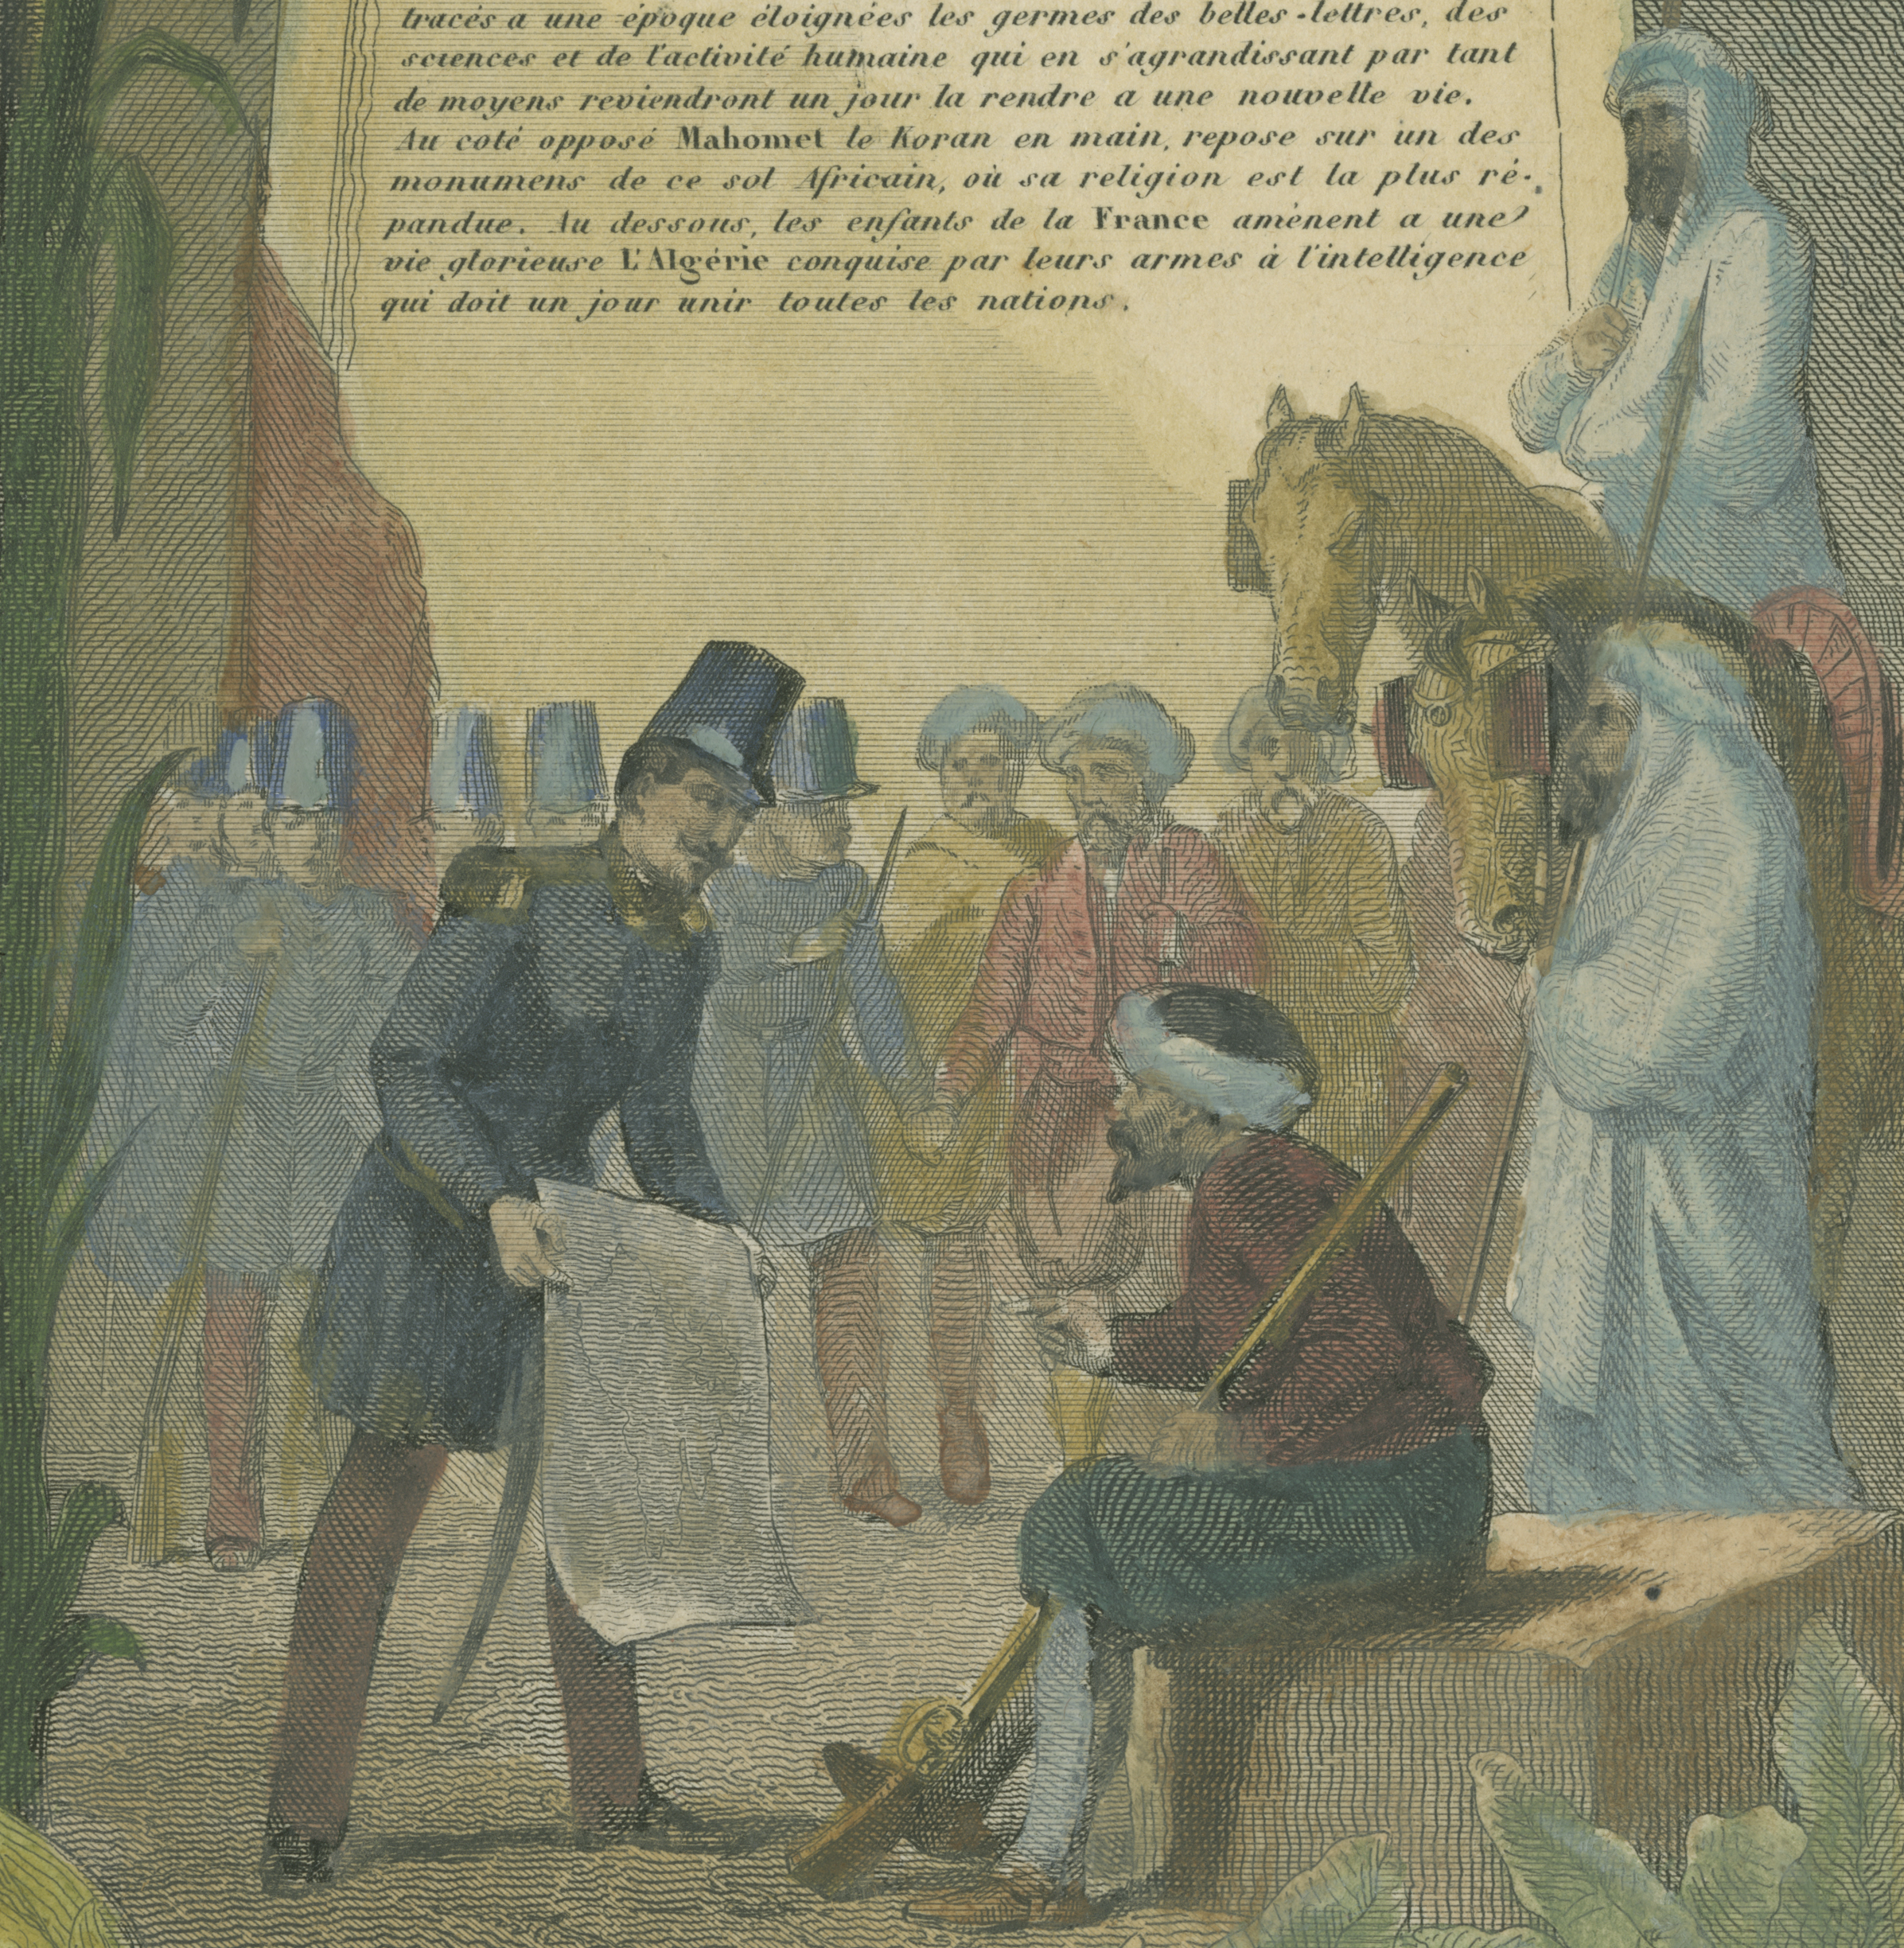 Closeup view of a scene depicting French military officials presenting paperwork to African men from a map of Africa.